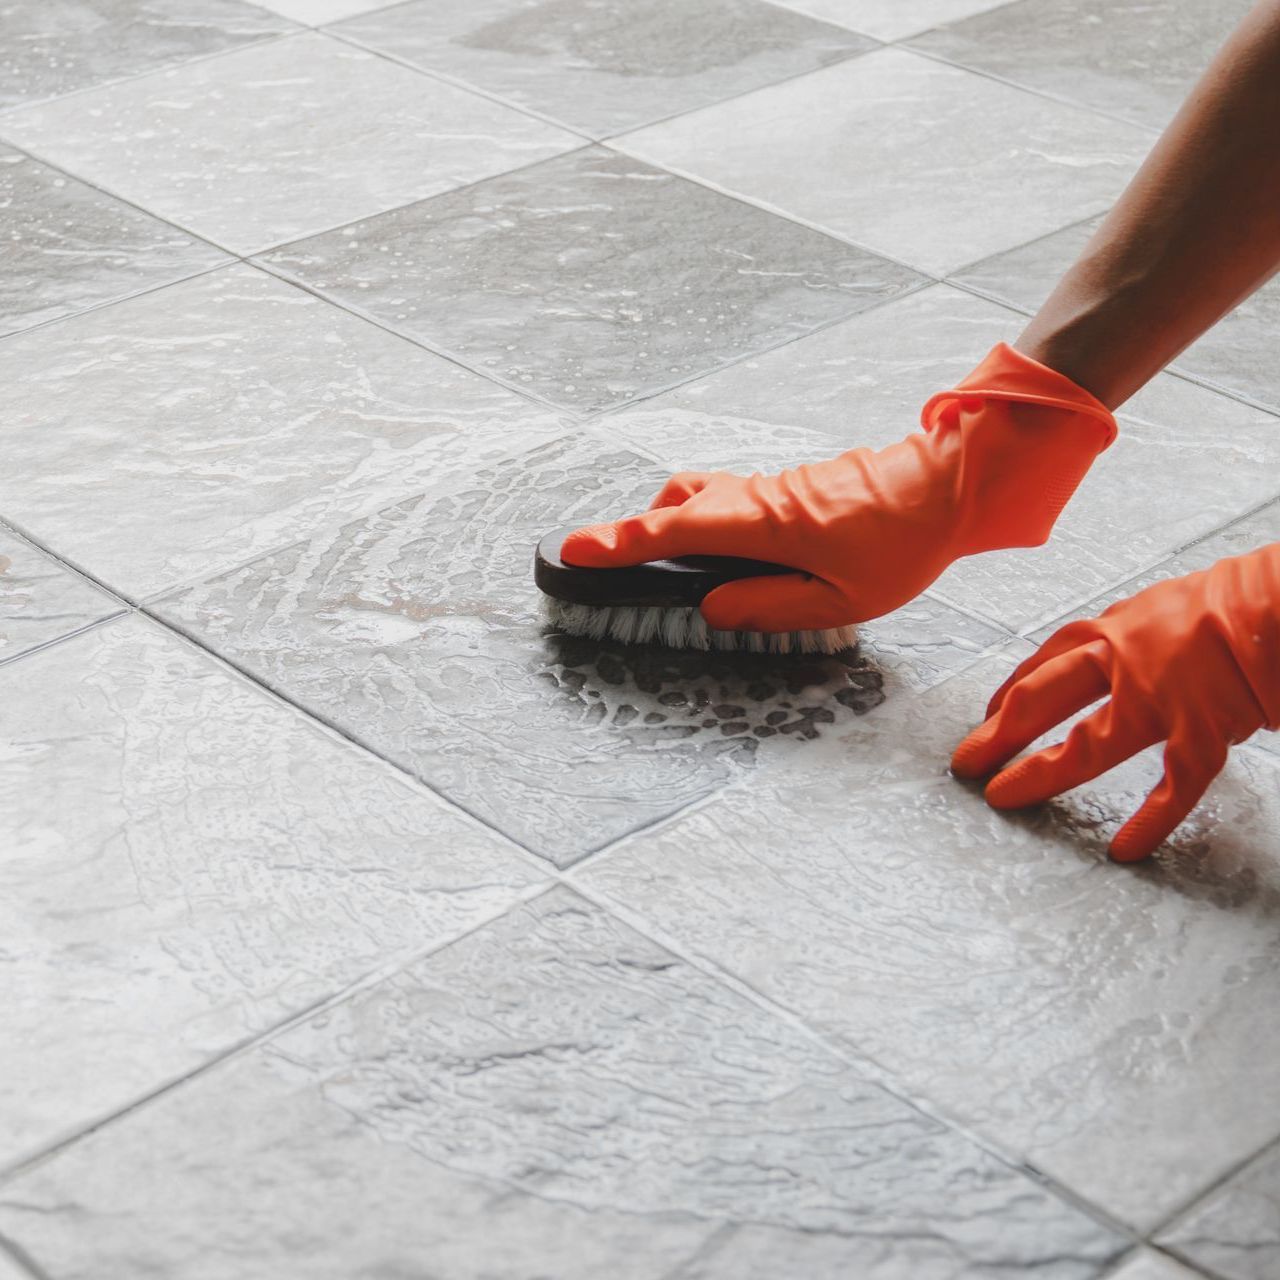 a person wearing orange gloves is cleaning a tiled floor